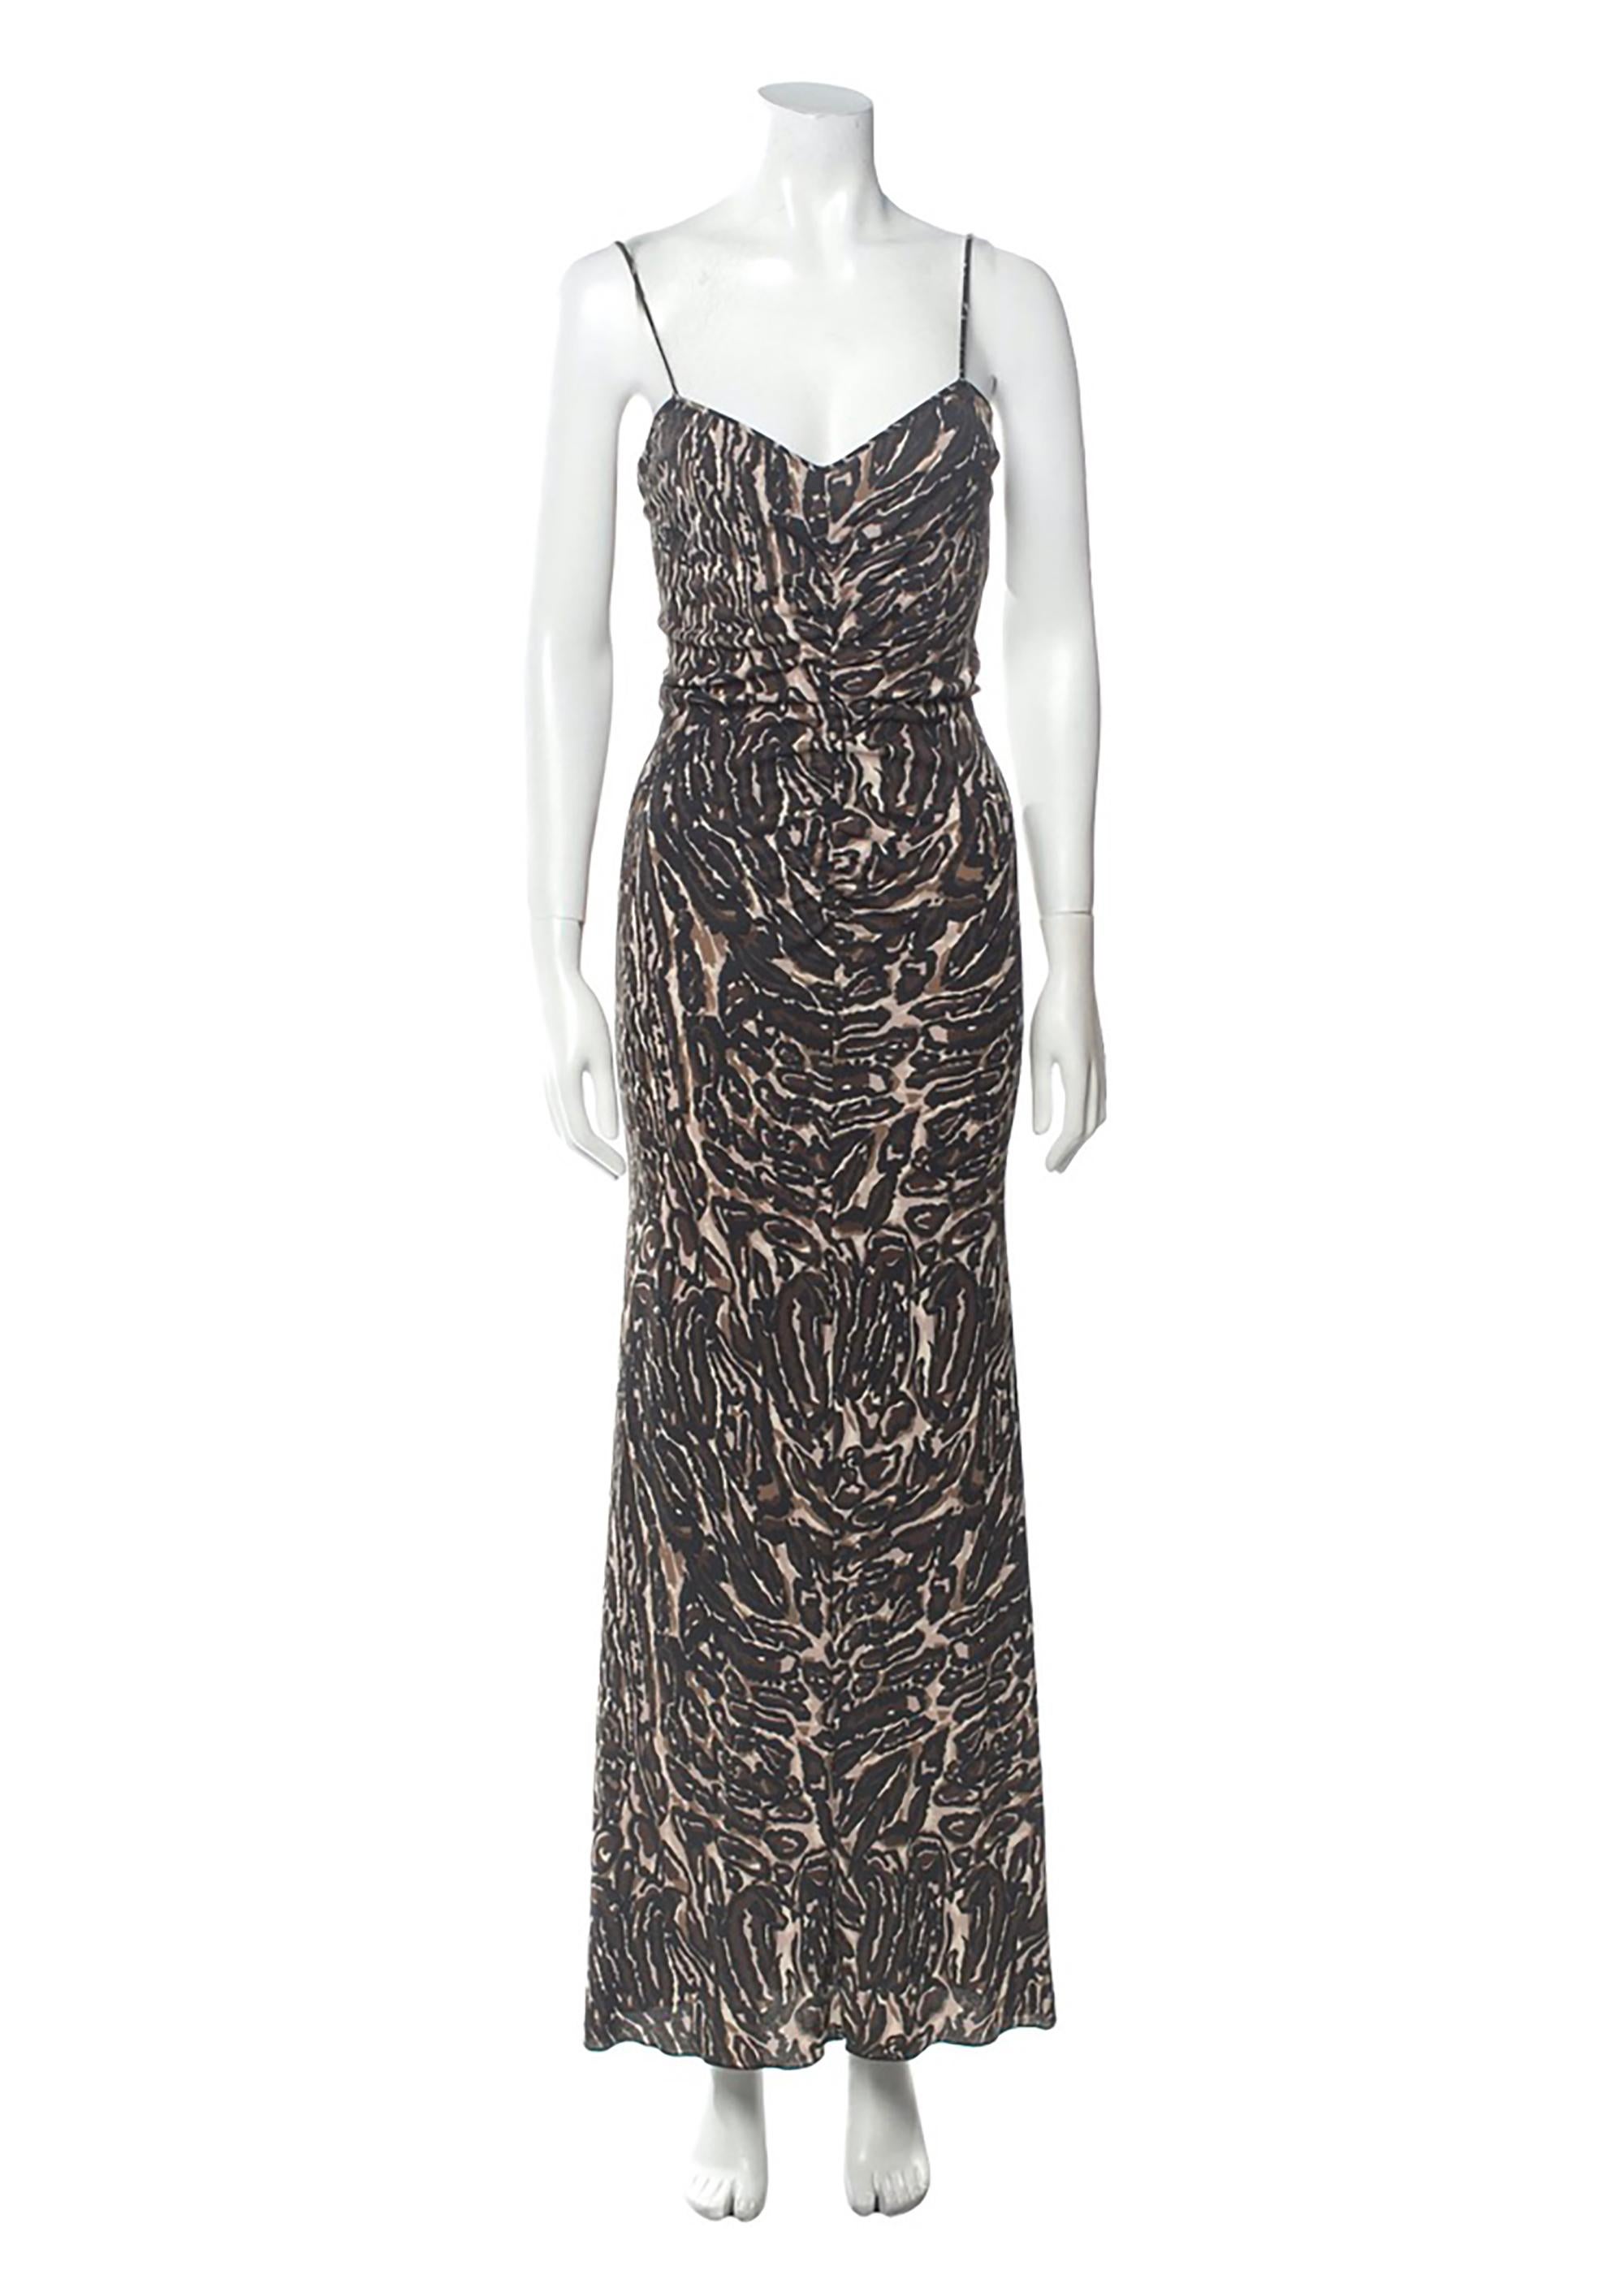 Ozbek Printed Slip Dress In Excellent Condition For Sale In Austin, TX